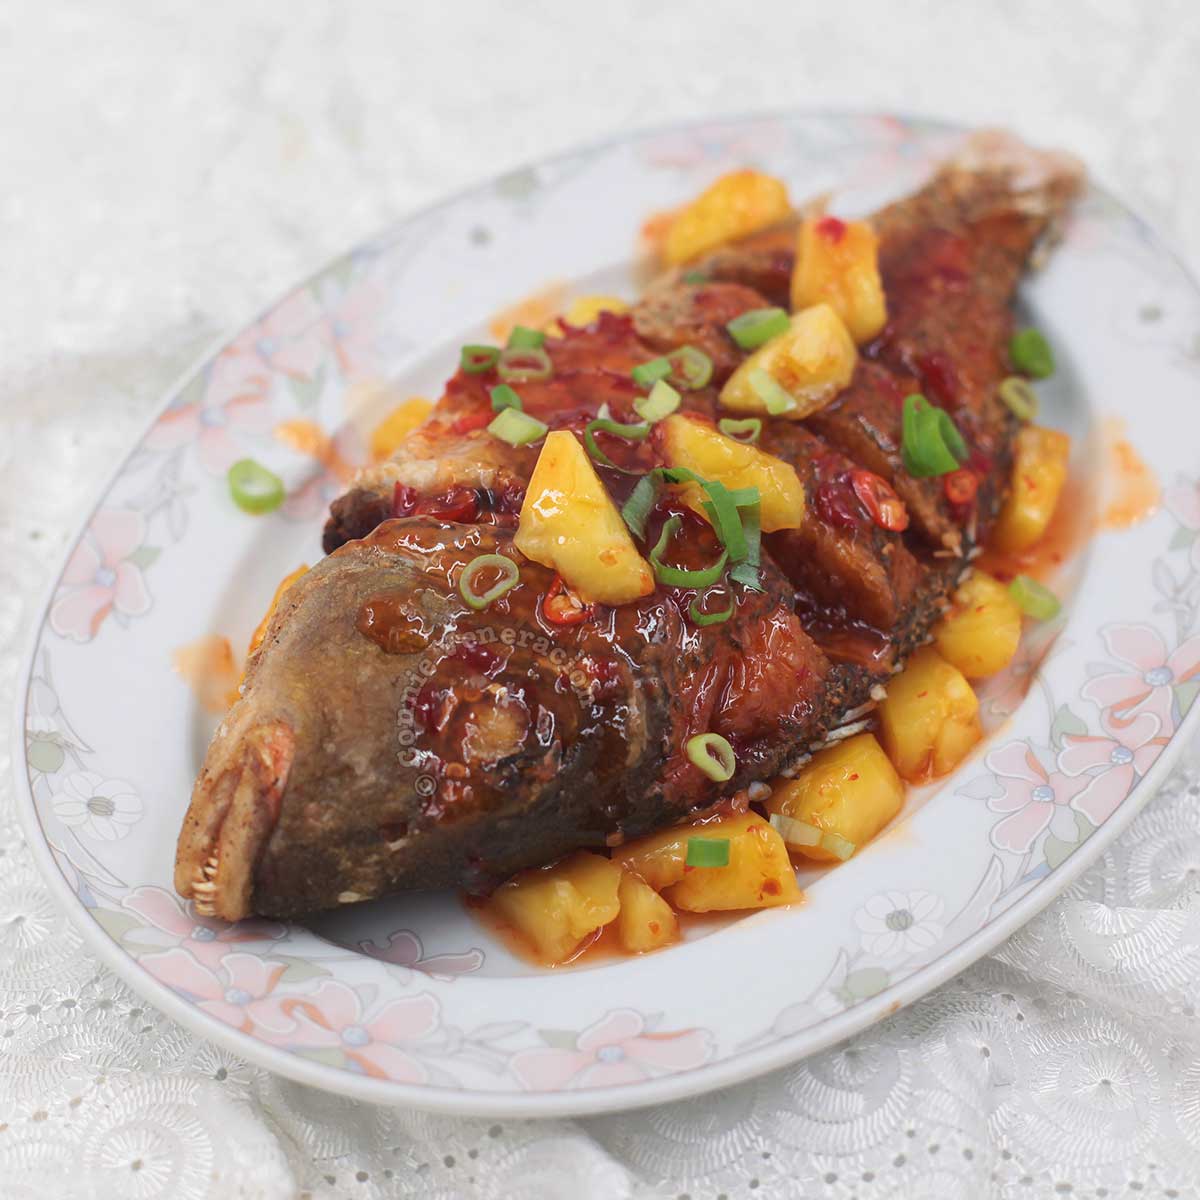 Fried whole fish with chili pineapple sauce